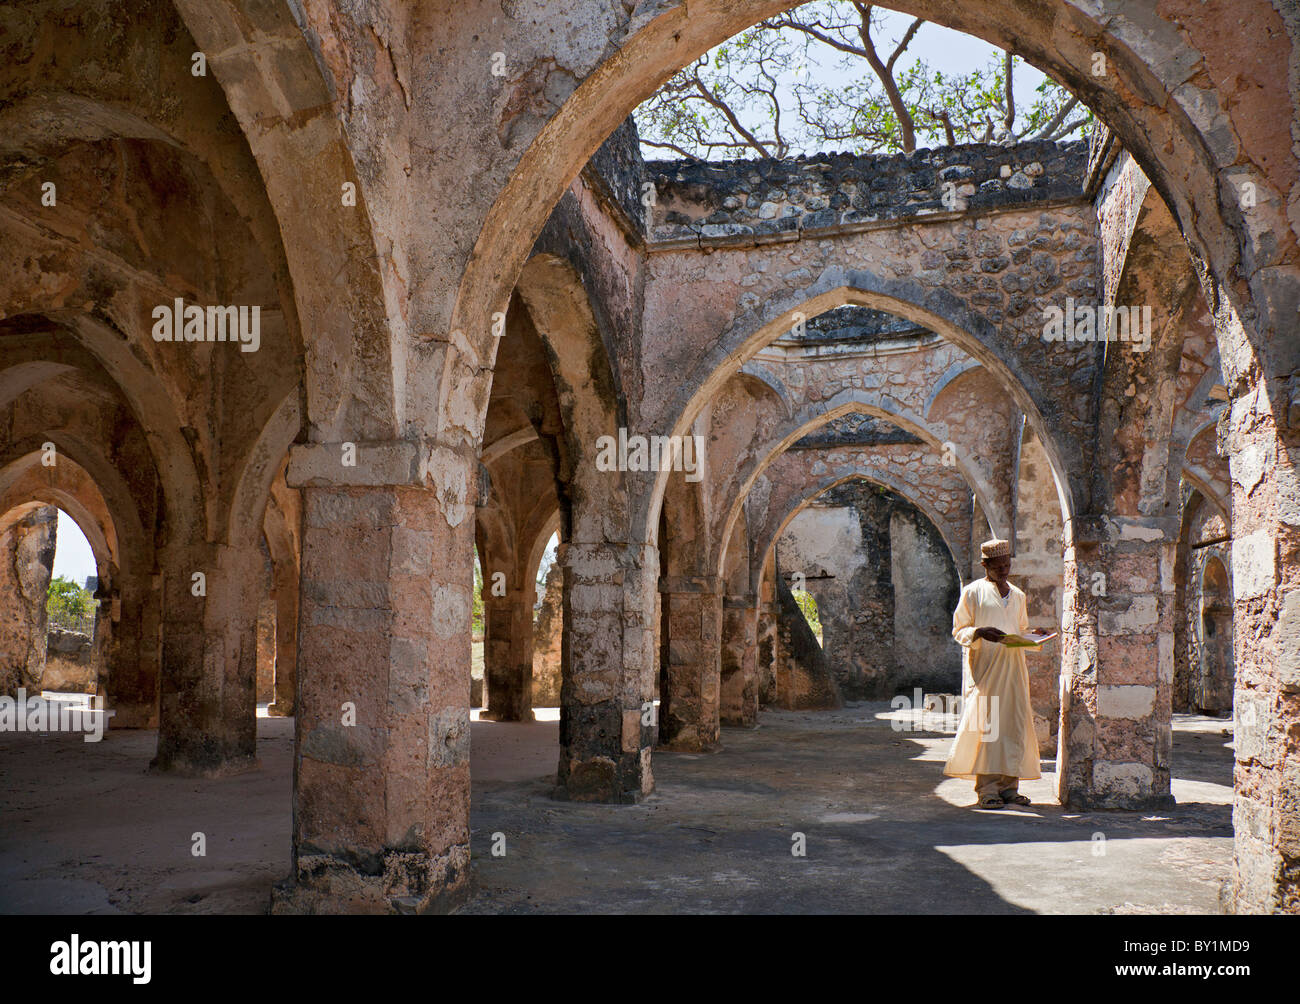 The magnificent ruins of the Great Mosque at Kilwa Kisiwani which was first built in the 10th and 11th centuries with important Stock Photo